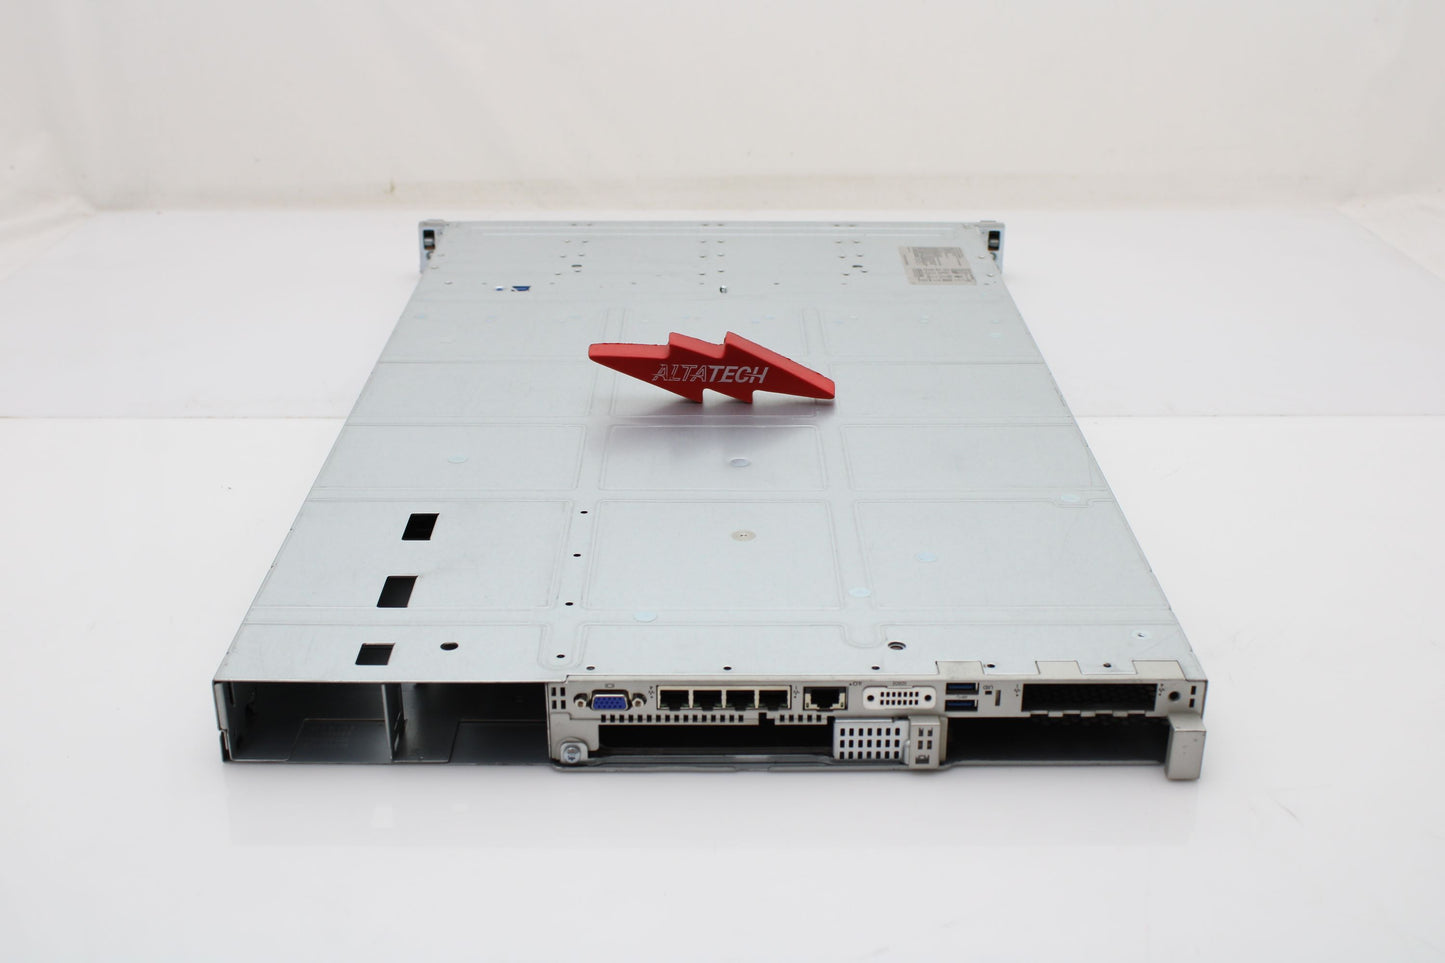 HP 755259-B21 ProLiant DL360 G9 CTO 4LFF Chassis, Used